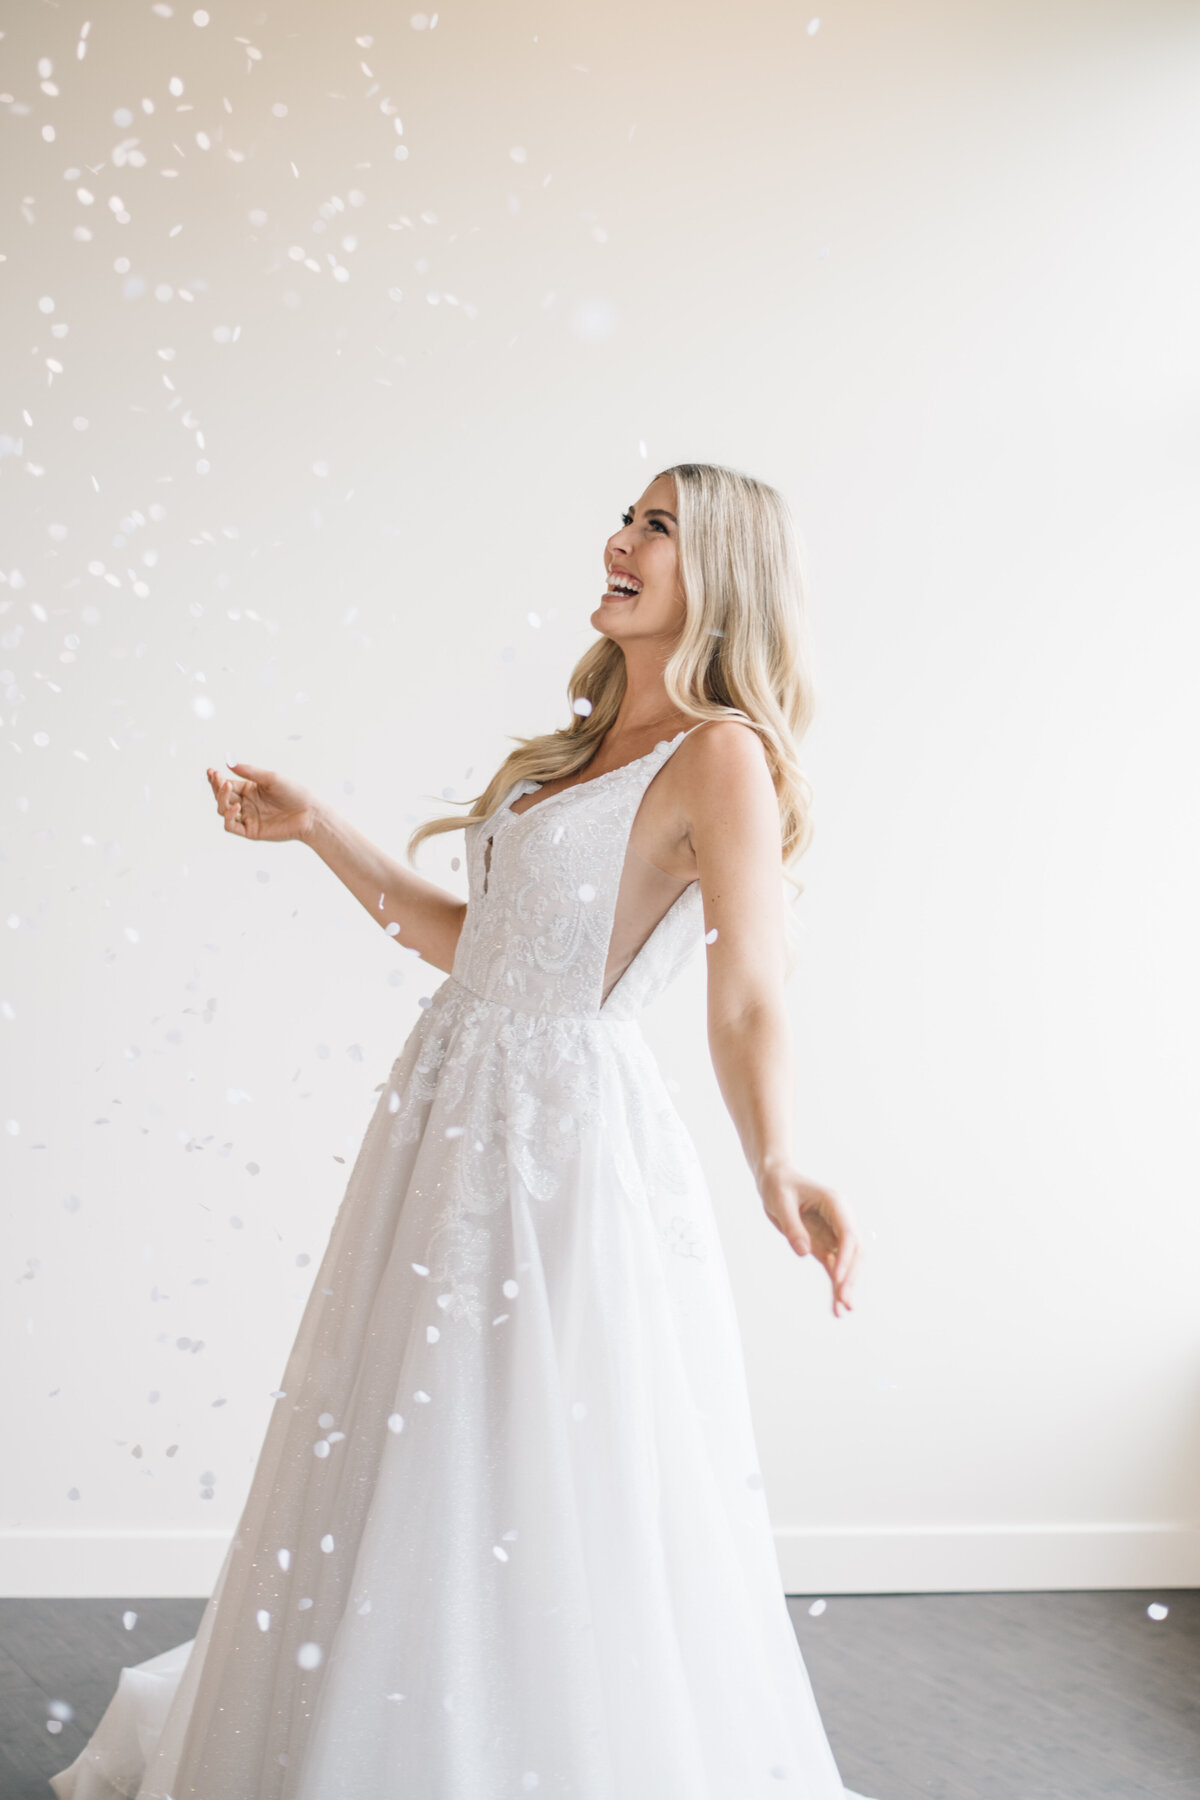 Classic A-line bridal gown from Delica Bridal, an elegant bridal boutique based in Edmonton, Alberta. Featured on the Brontë Bride Vendor Guide.